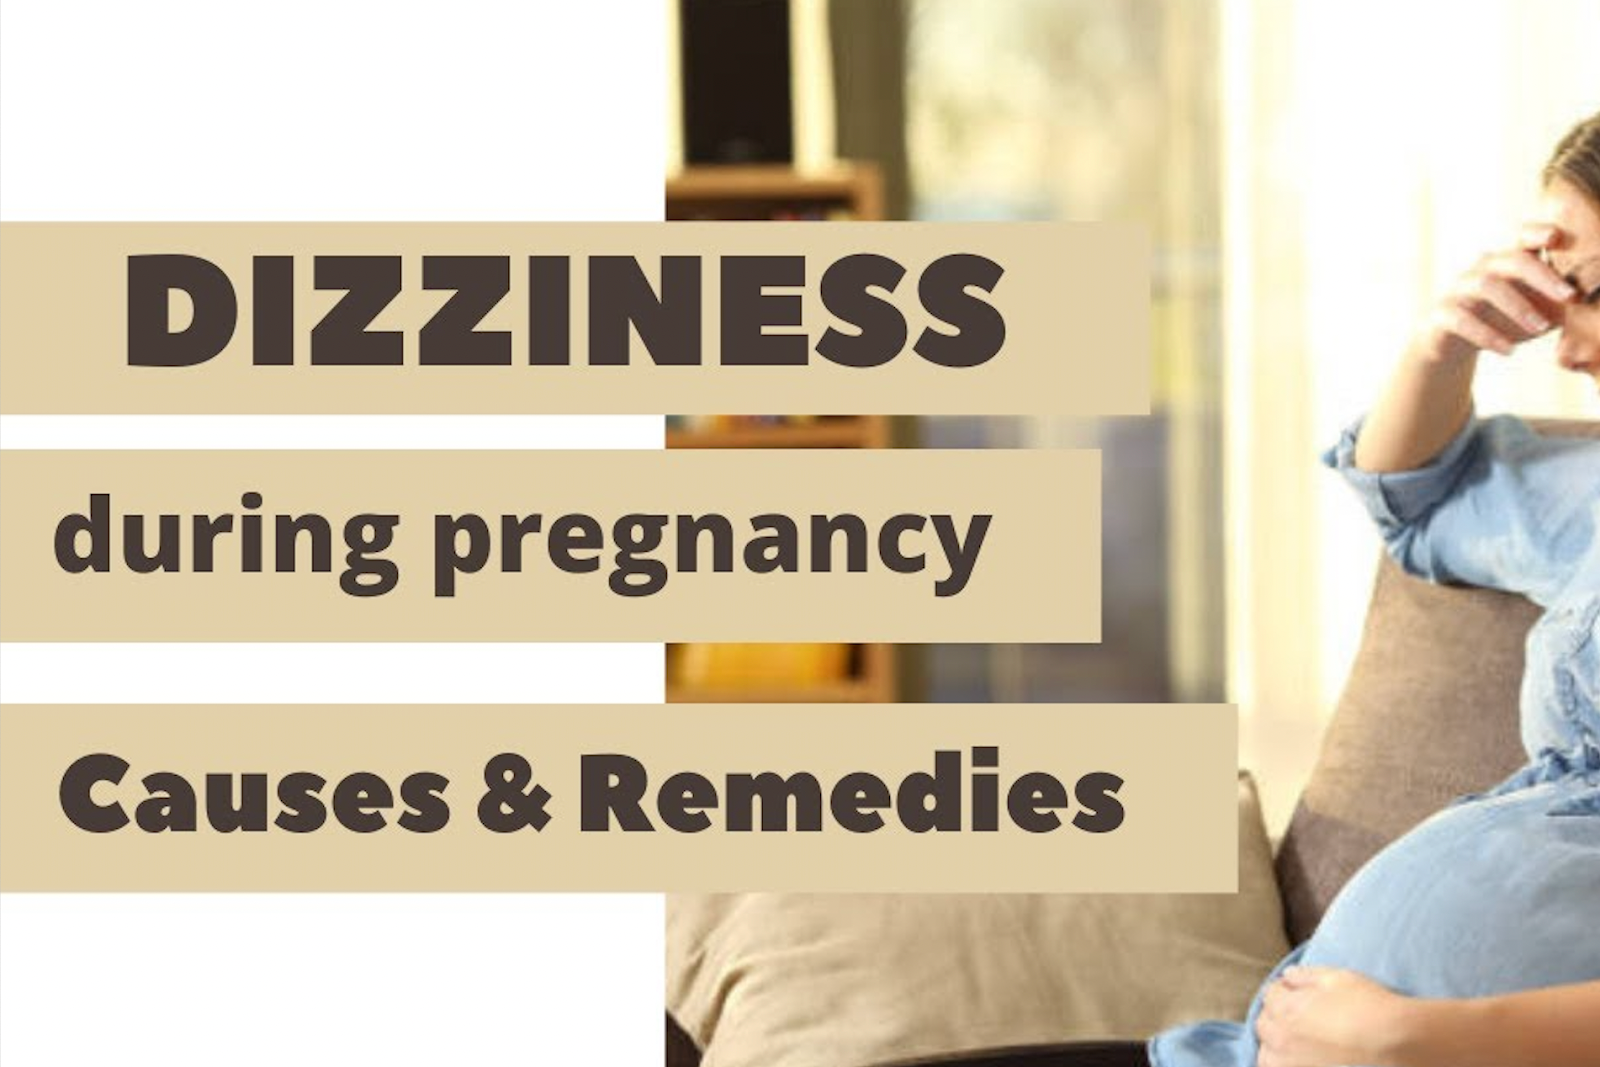 Diziness during pregnancy - causes and remedies